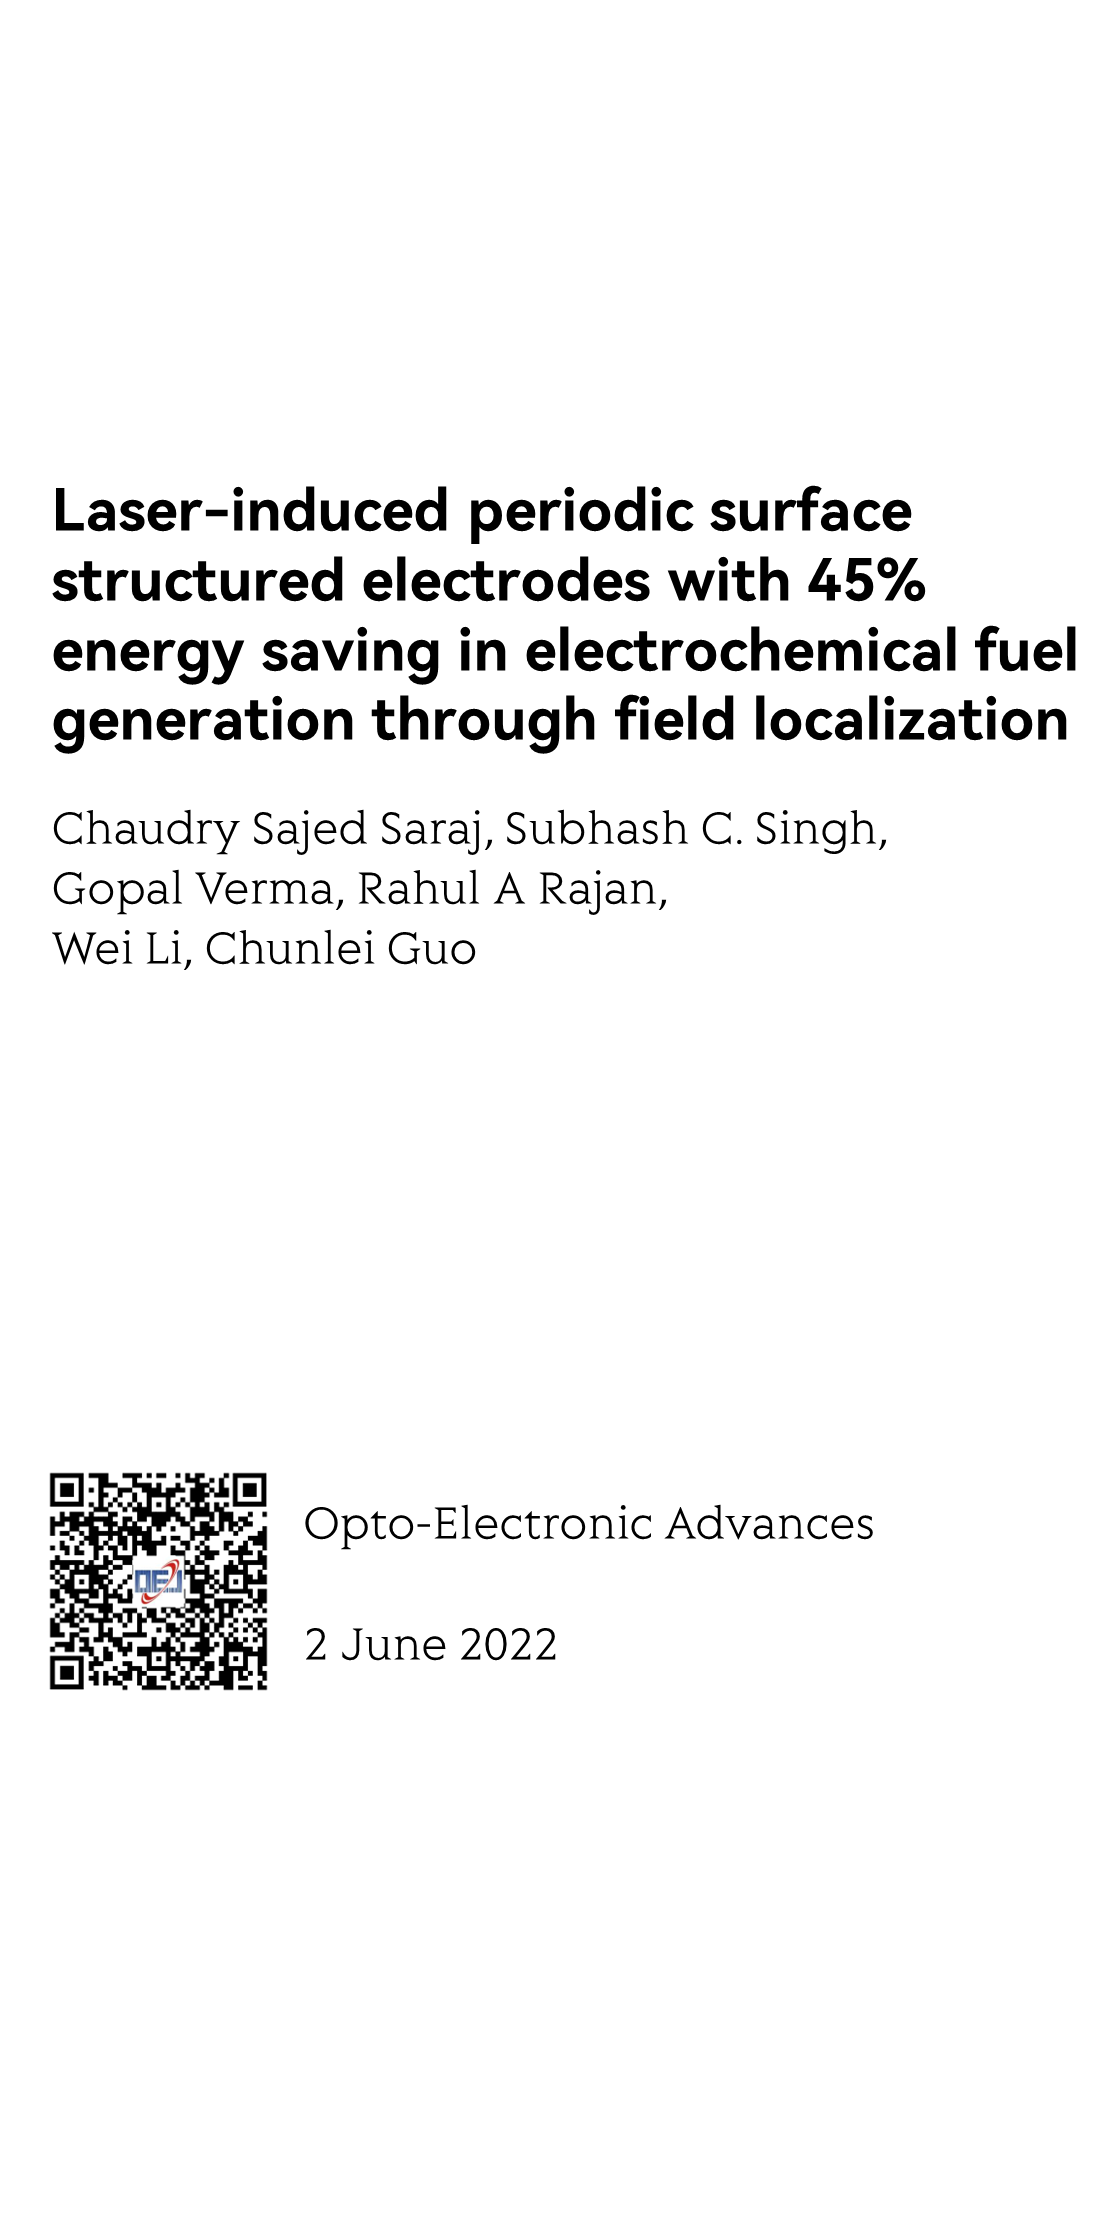 Laser-induced periodic surface structured electrodes with 45% energy saving in electrochemical fuel generation through field localization_1